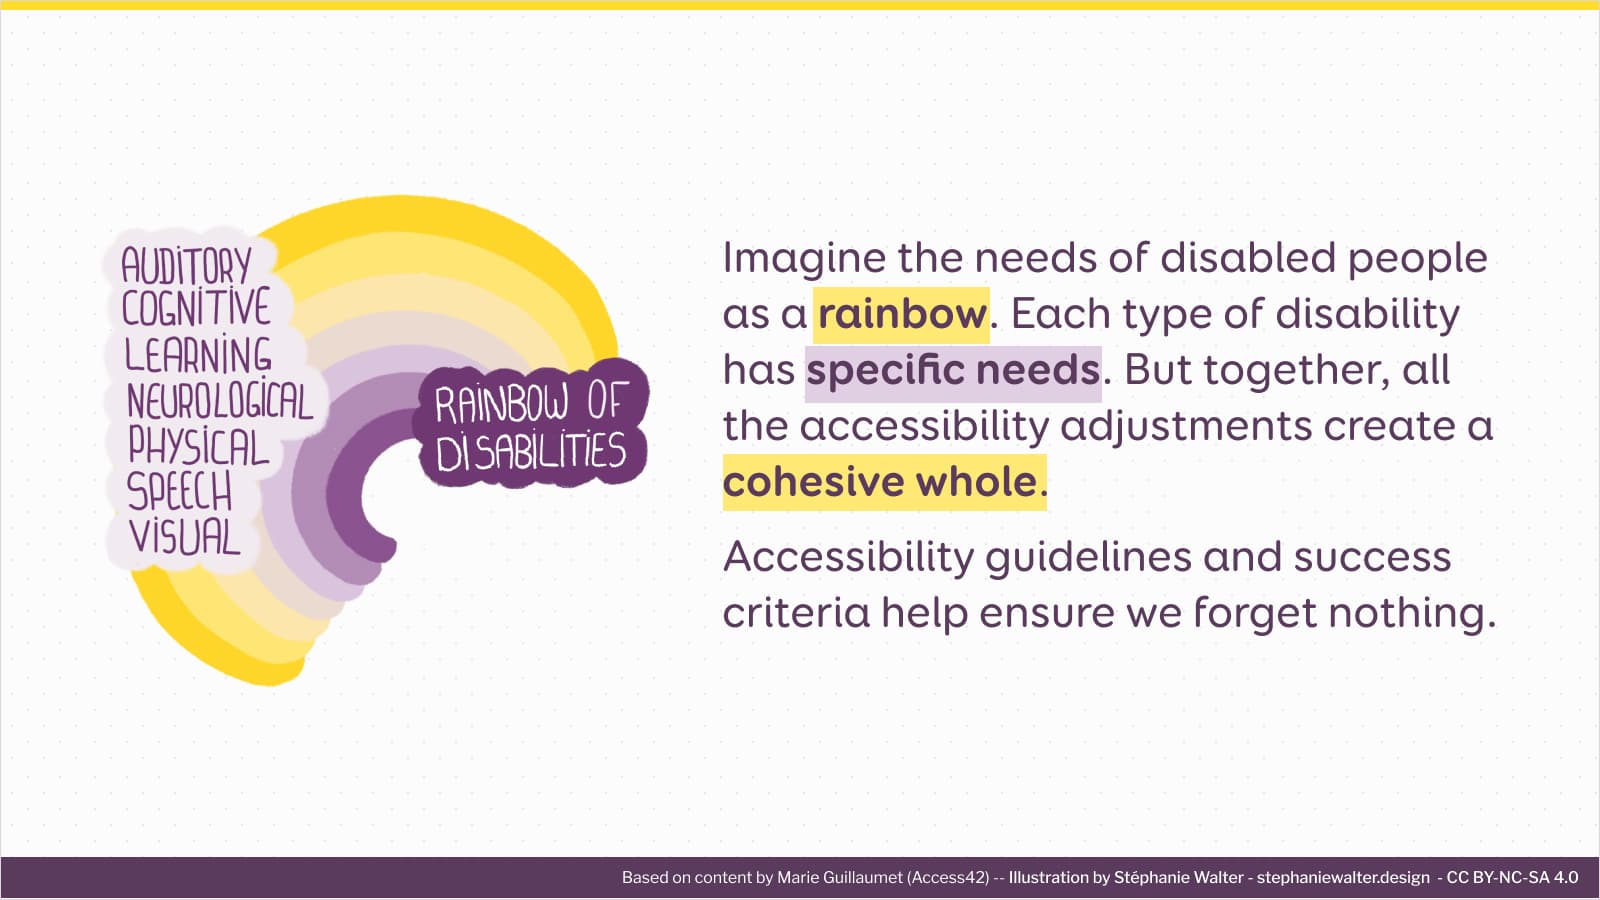 Illustration of a purple and yellow rainbow, named "rainbow of disabilities" with the following disabilities in a cloud: auditory, cognitive, learning, neurological, physical, speech, visual.